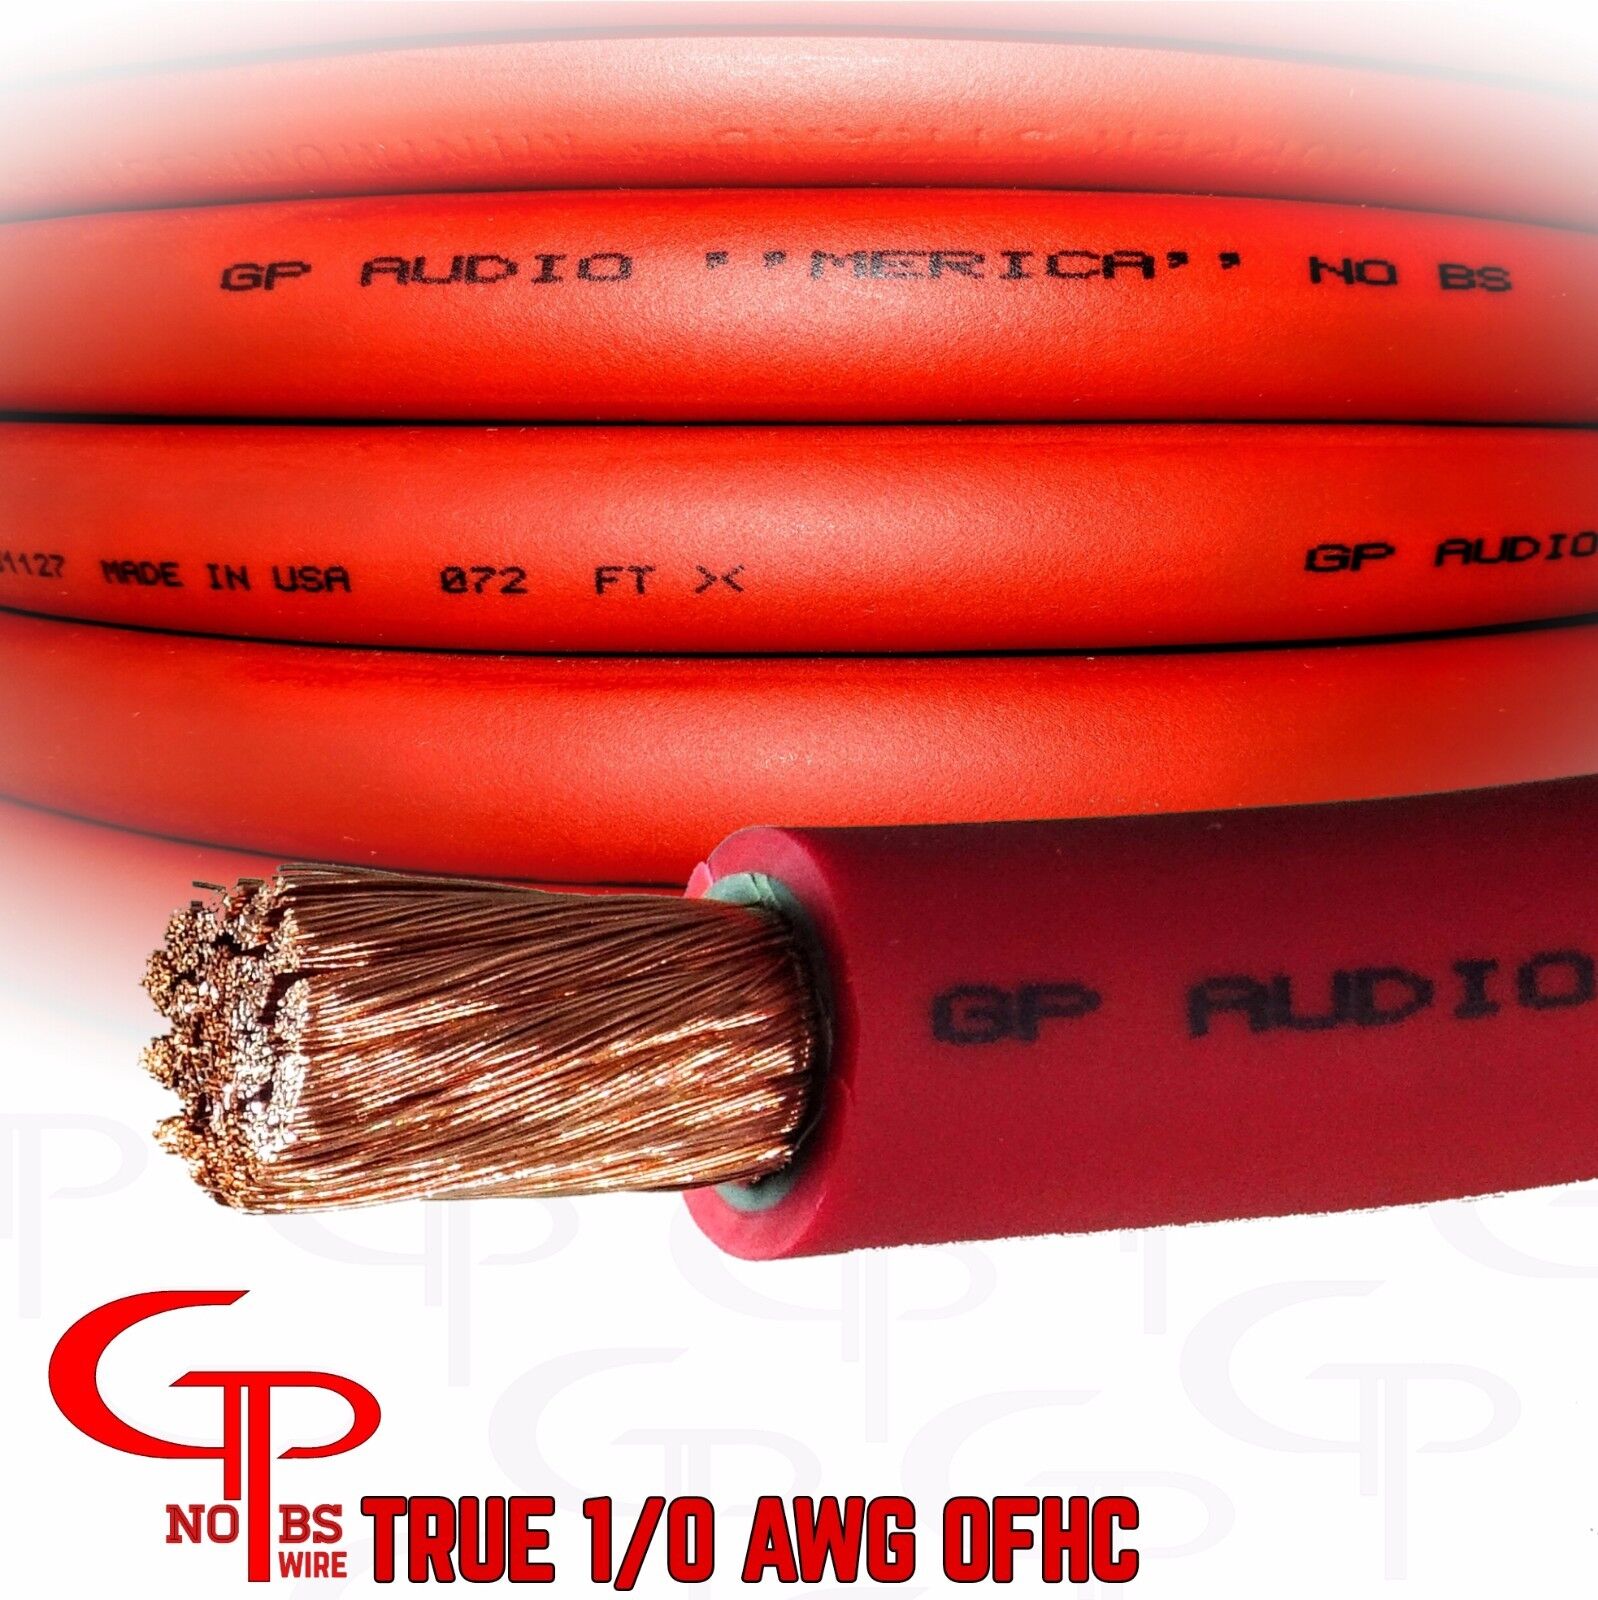 10 ft TRUE AWG 1/0 Gauge OFC COPPER RED Power Wire Ground Cable GP Car Audio